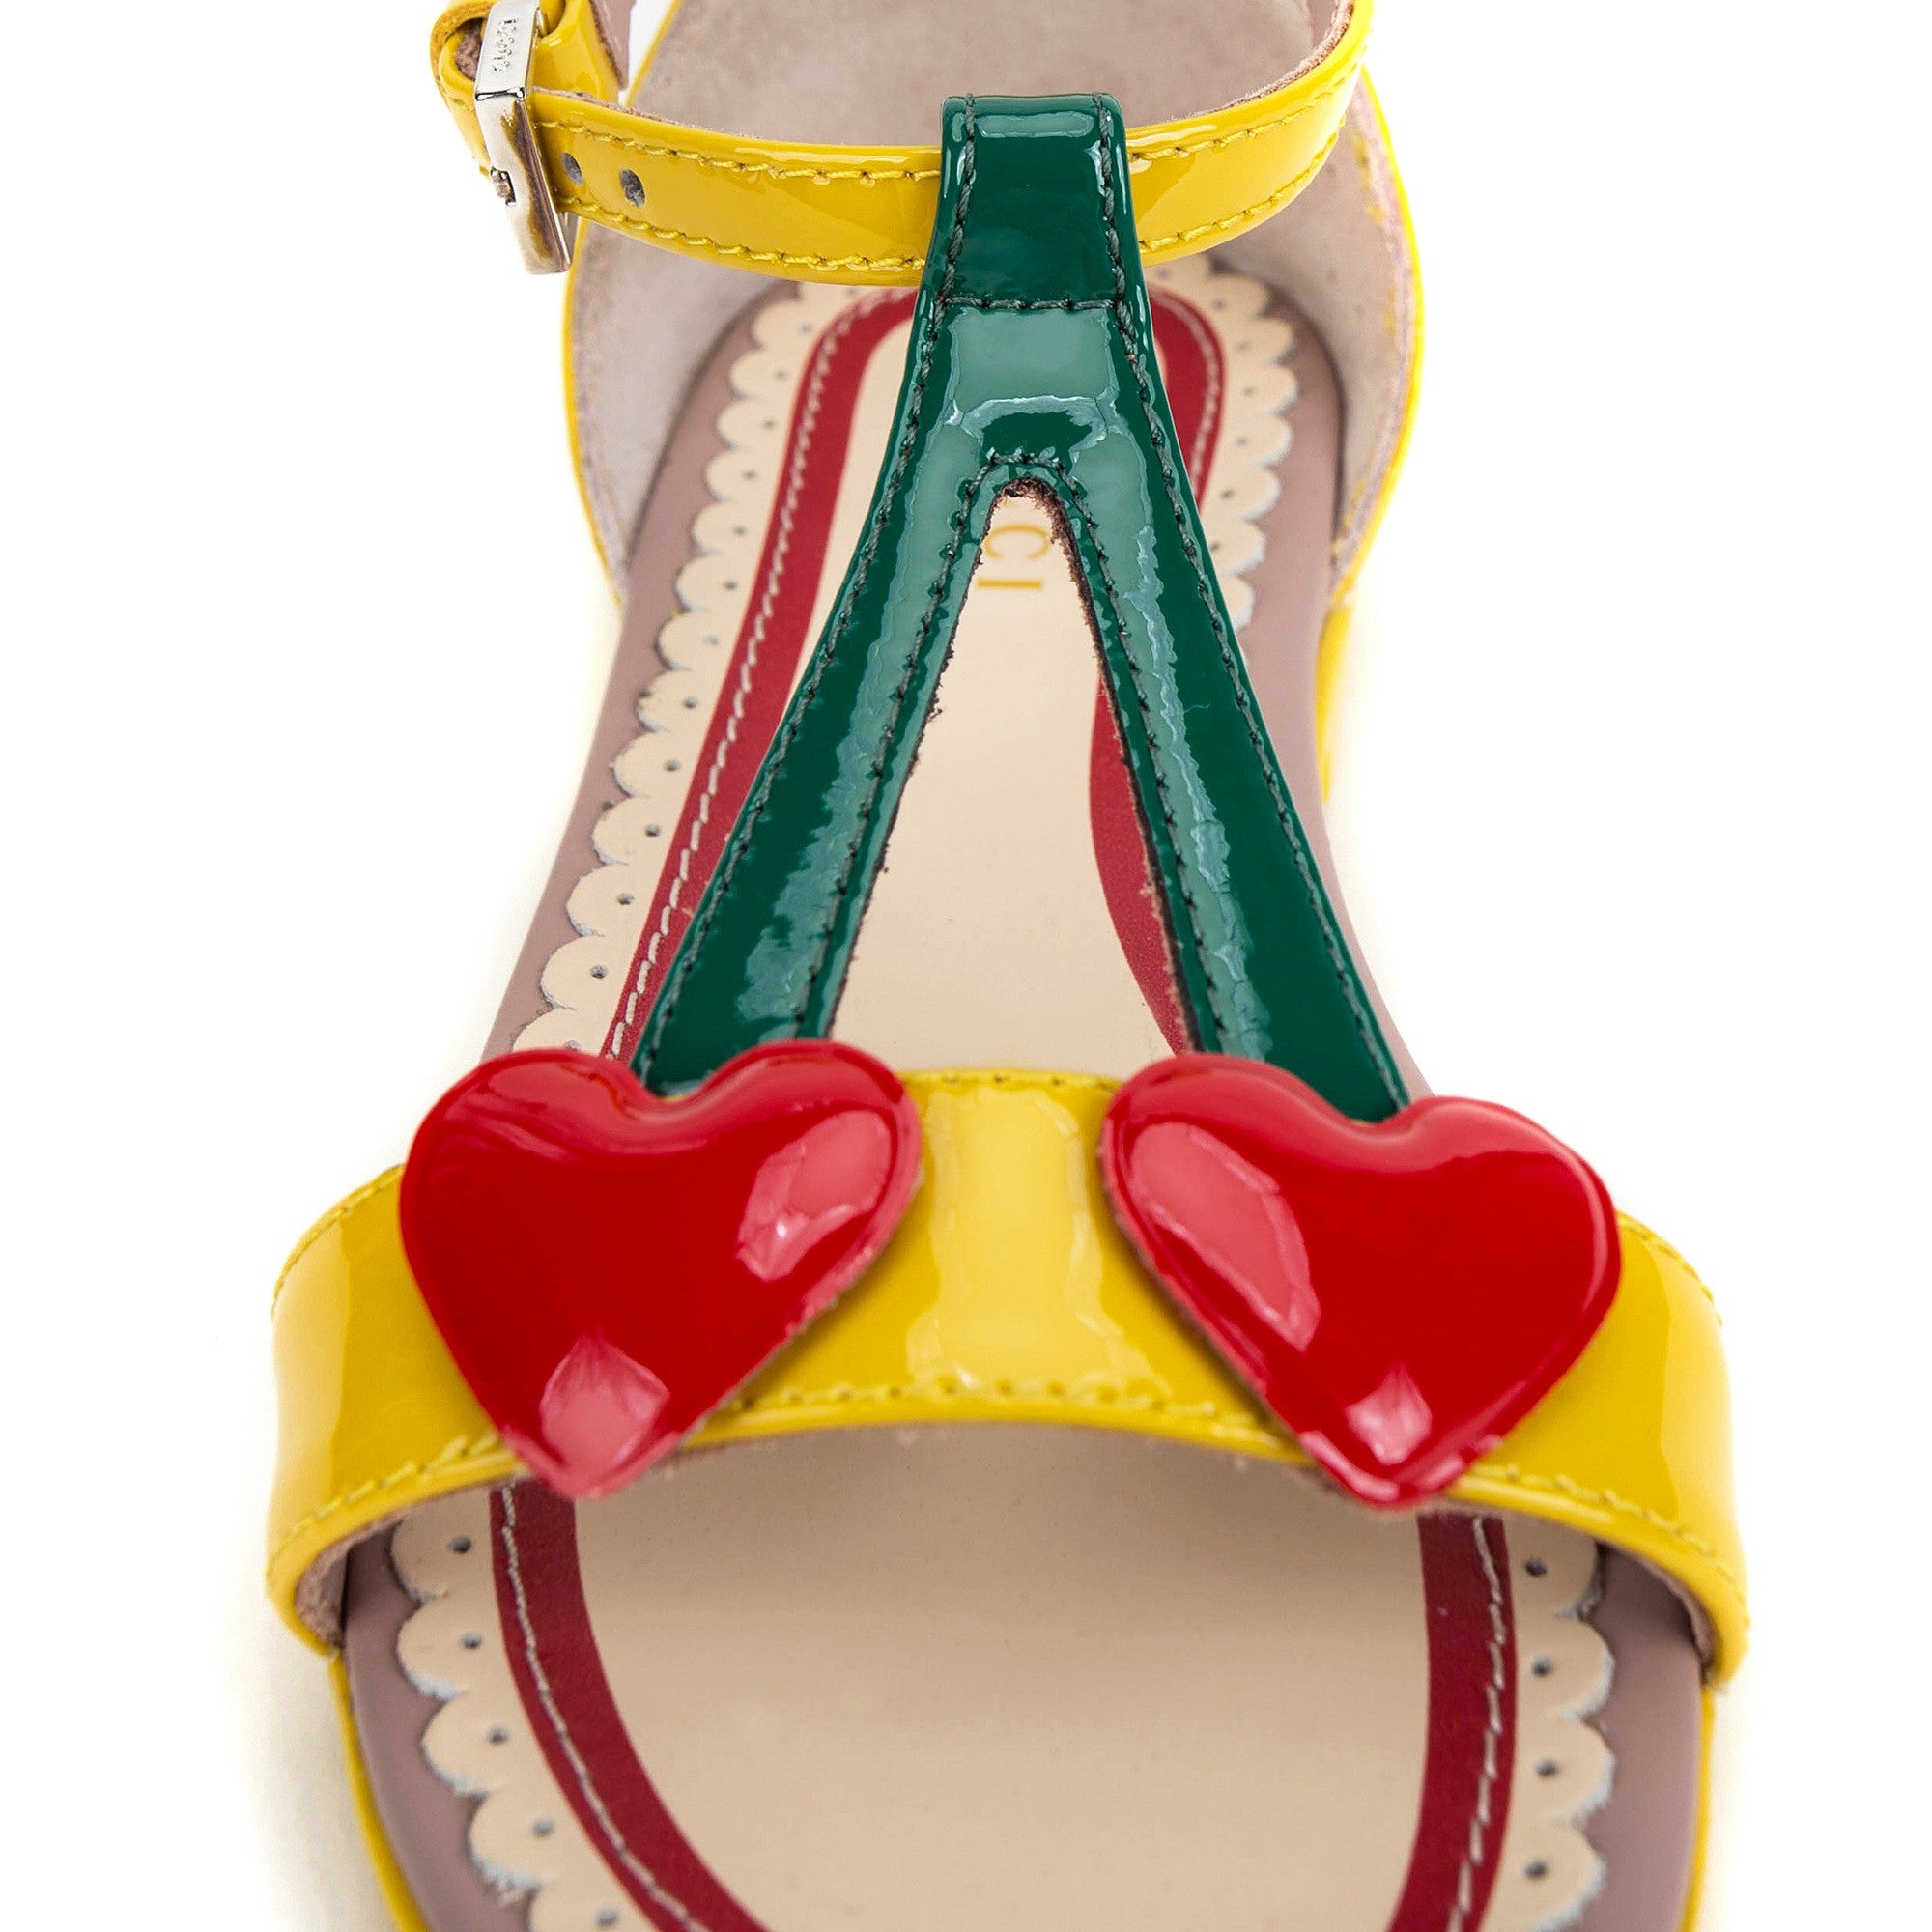 Girls Yellow Patent Leather Sandals